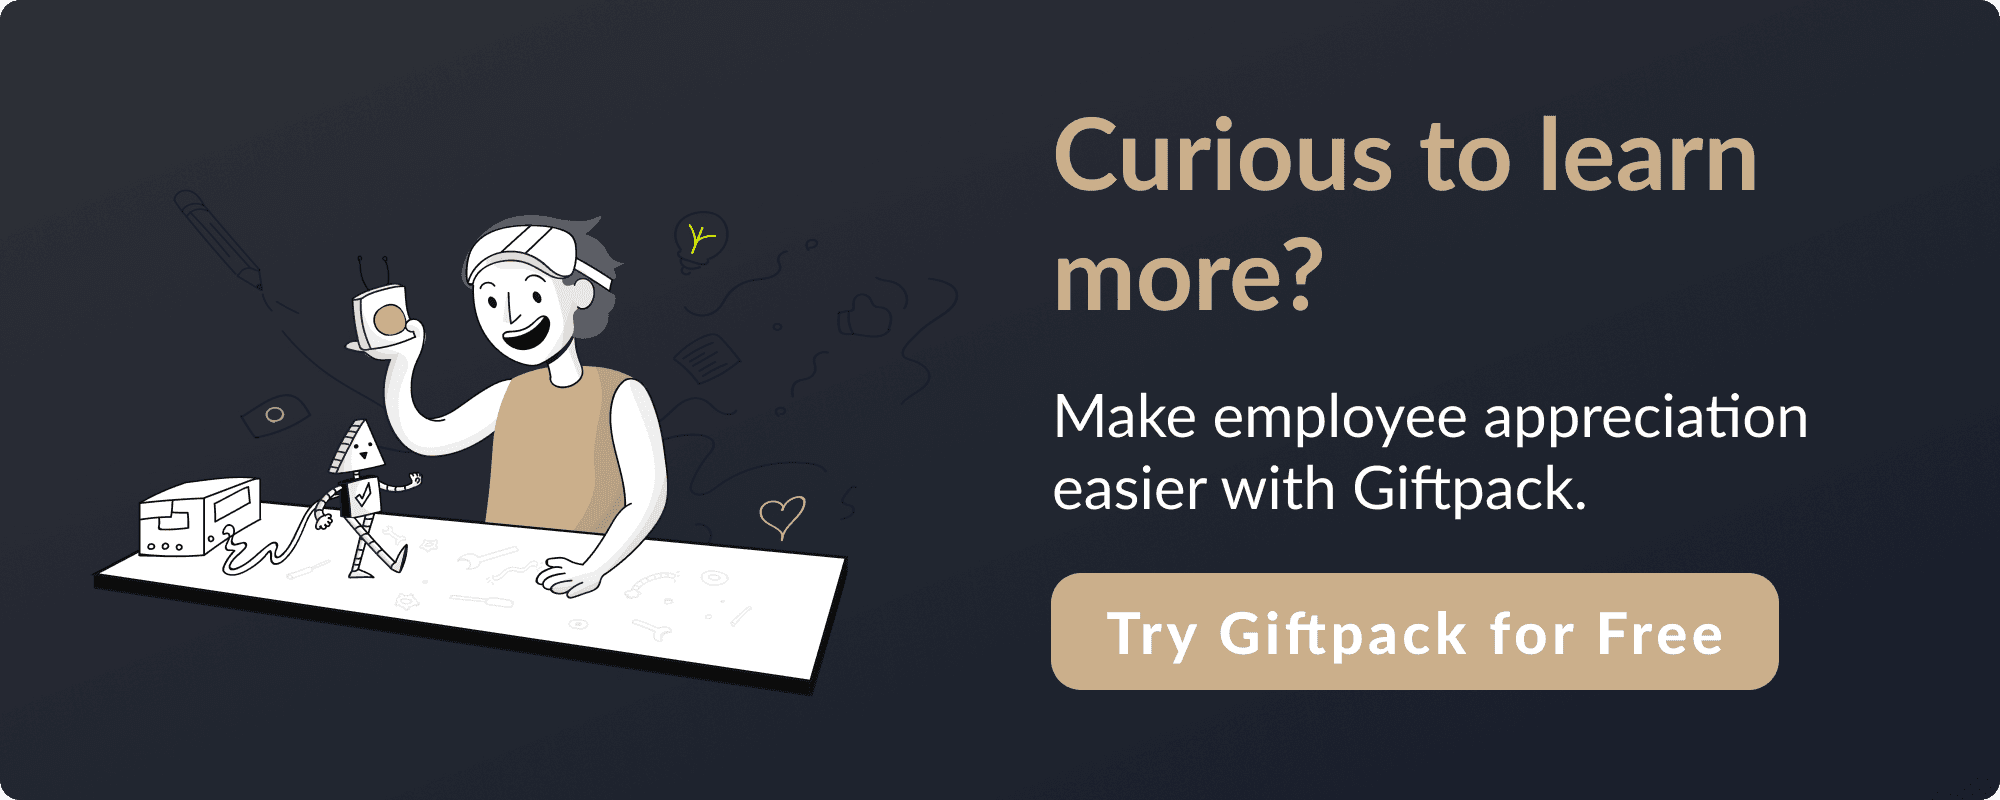 Curious to learn more? Make employee appreciation easier with Giftpack